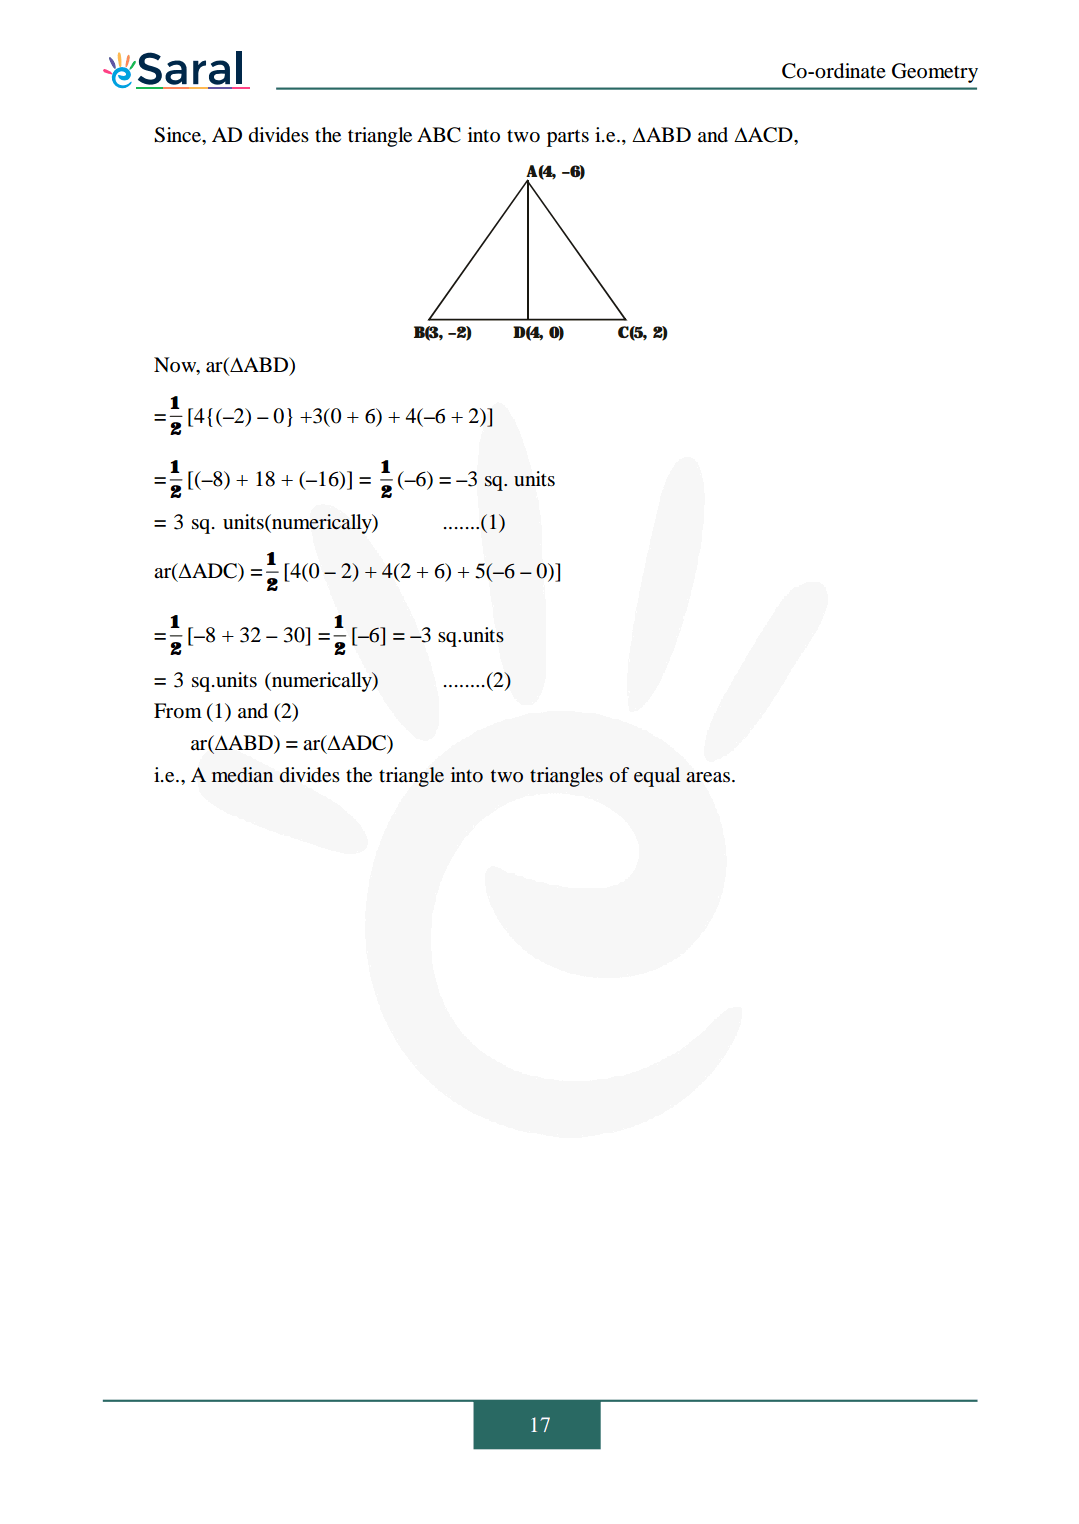 Class 10 Maths Chapter 7 exercise 7.3 solutions Image 4